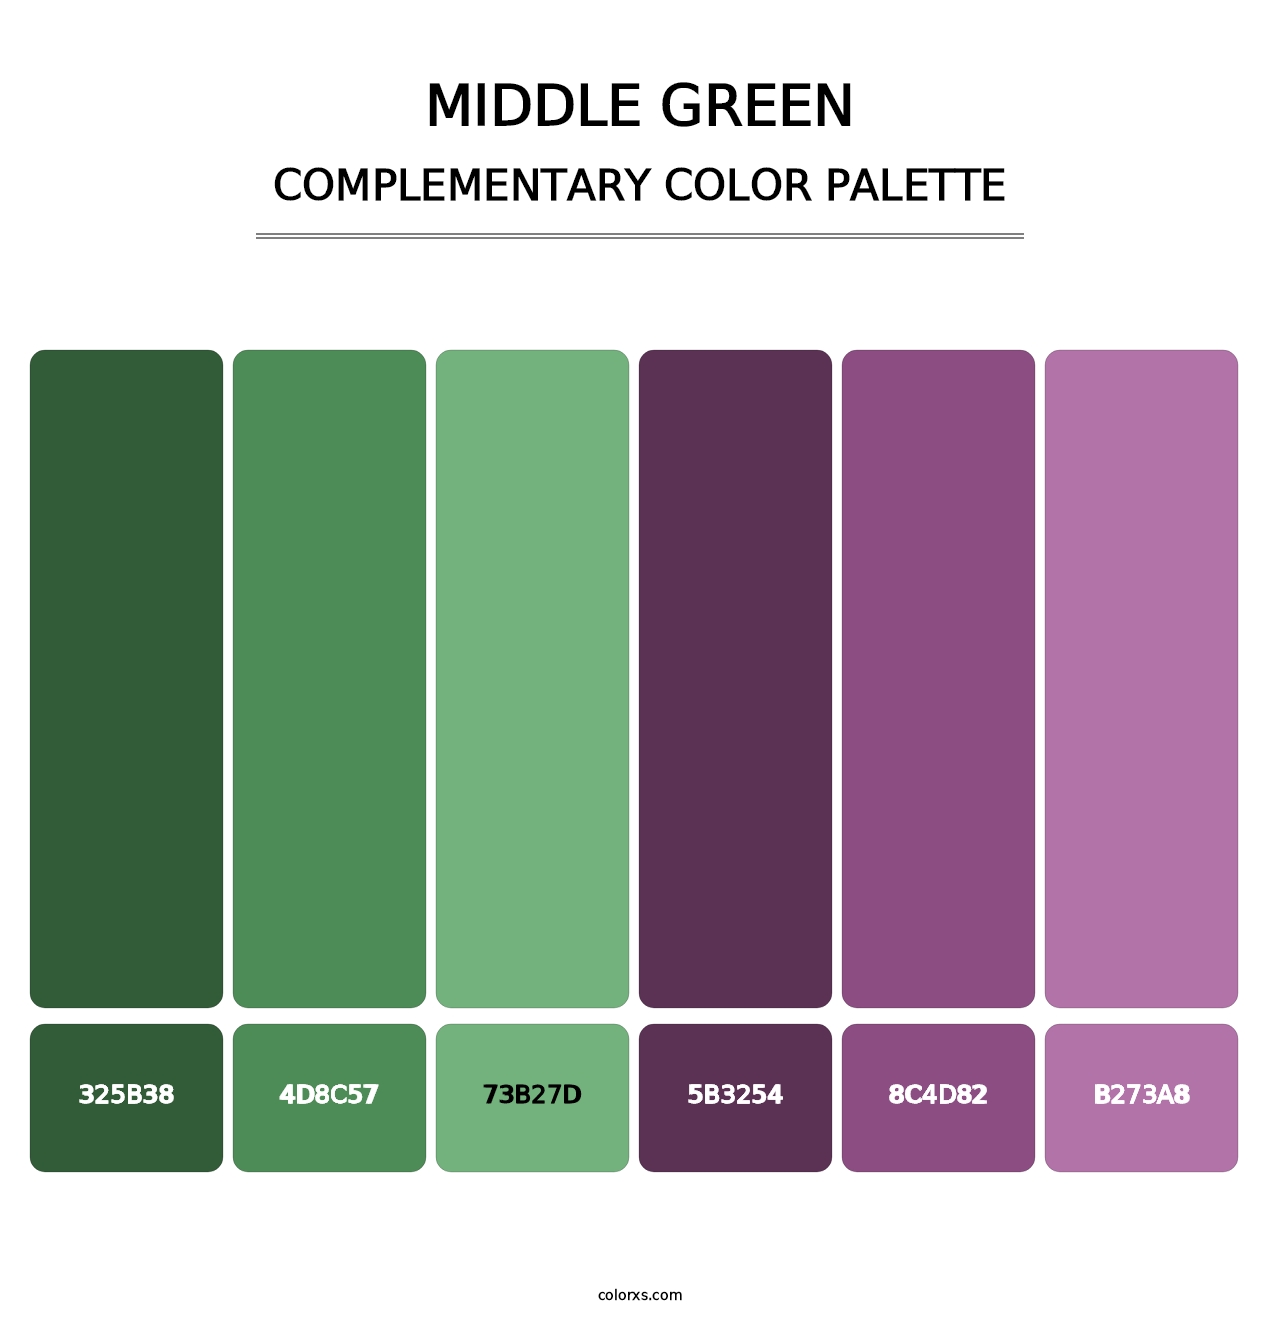 Middle Green - Complementary Color Palette